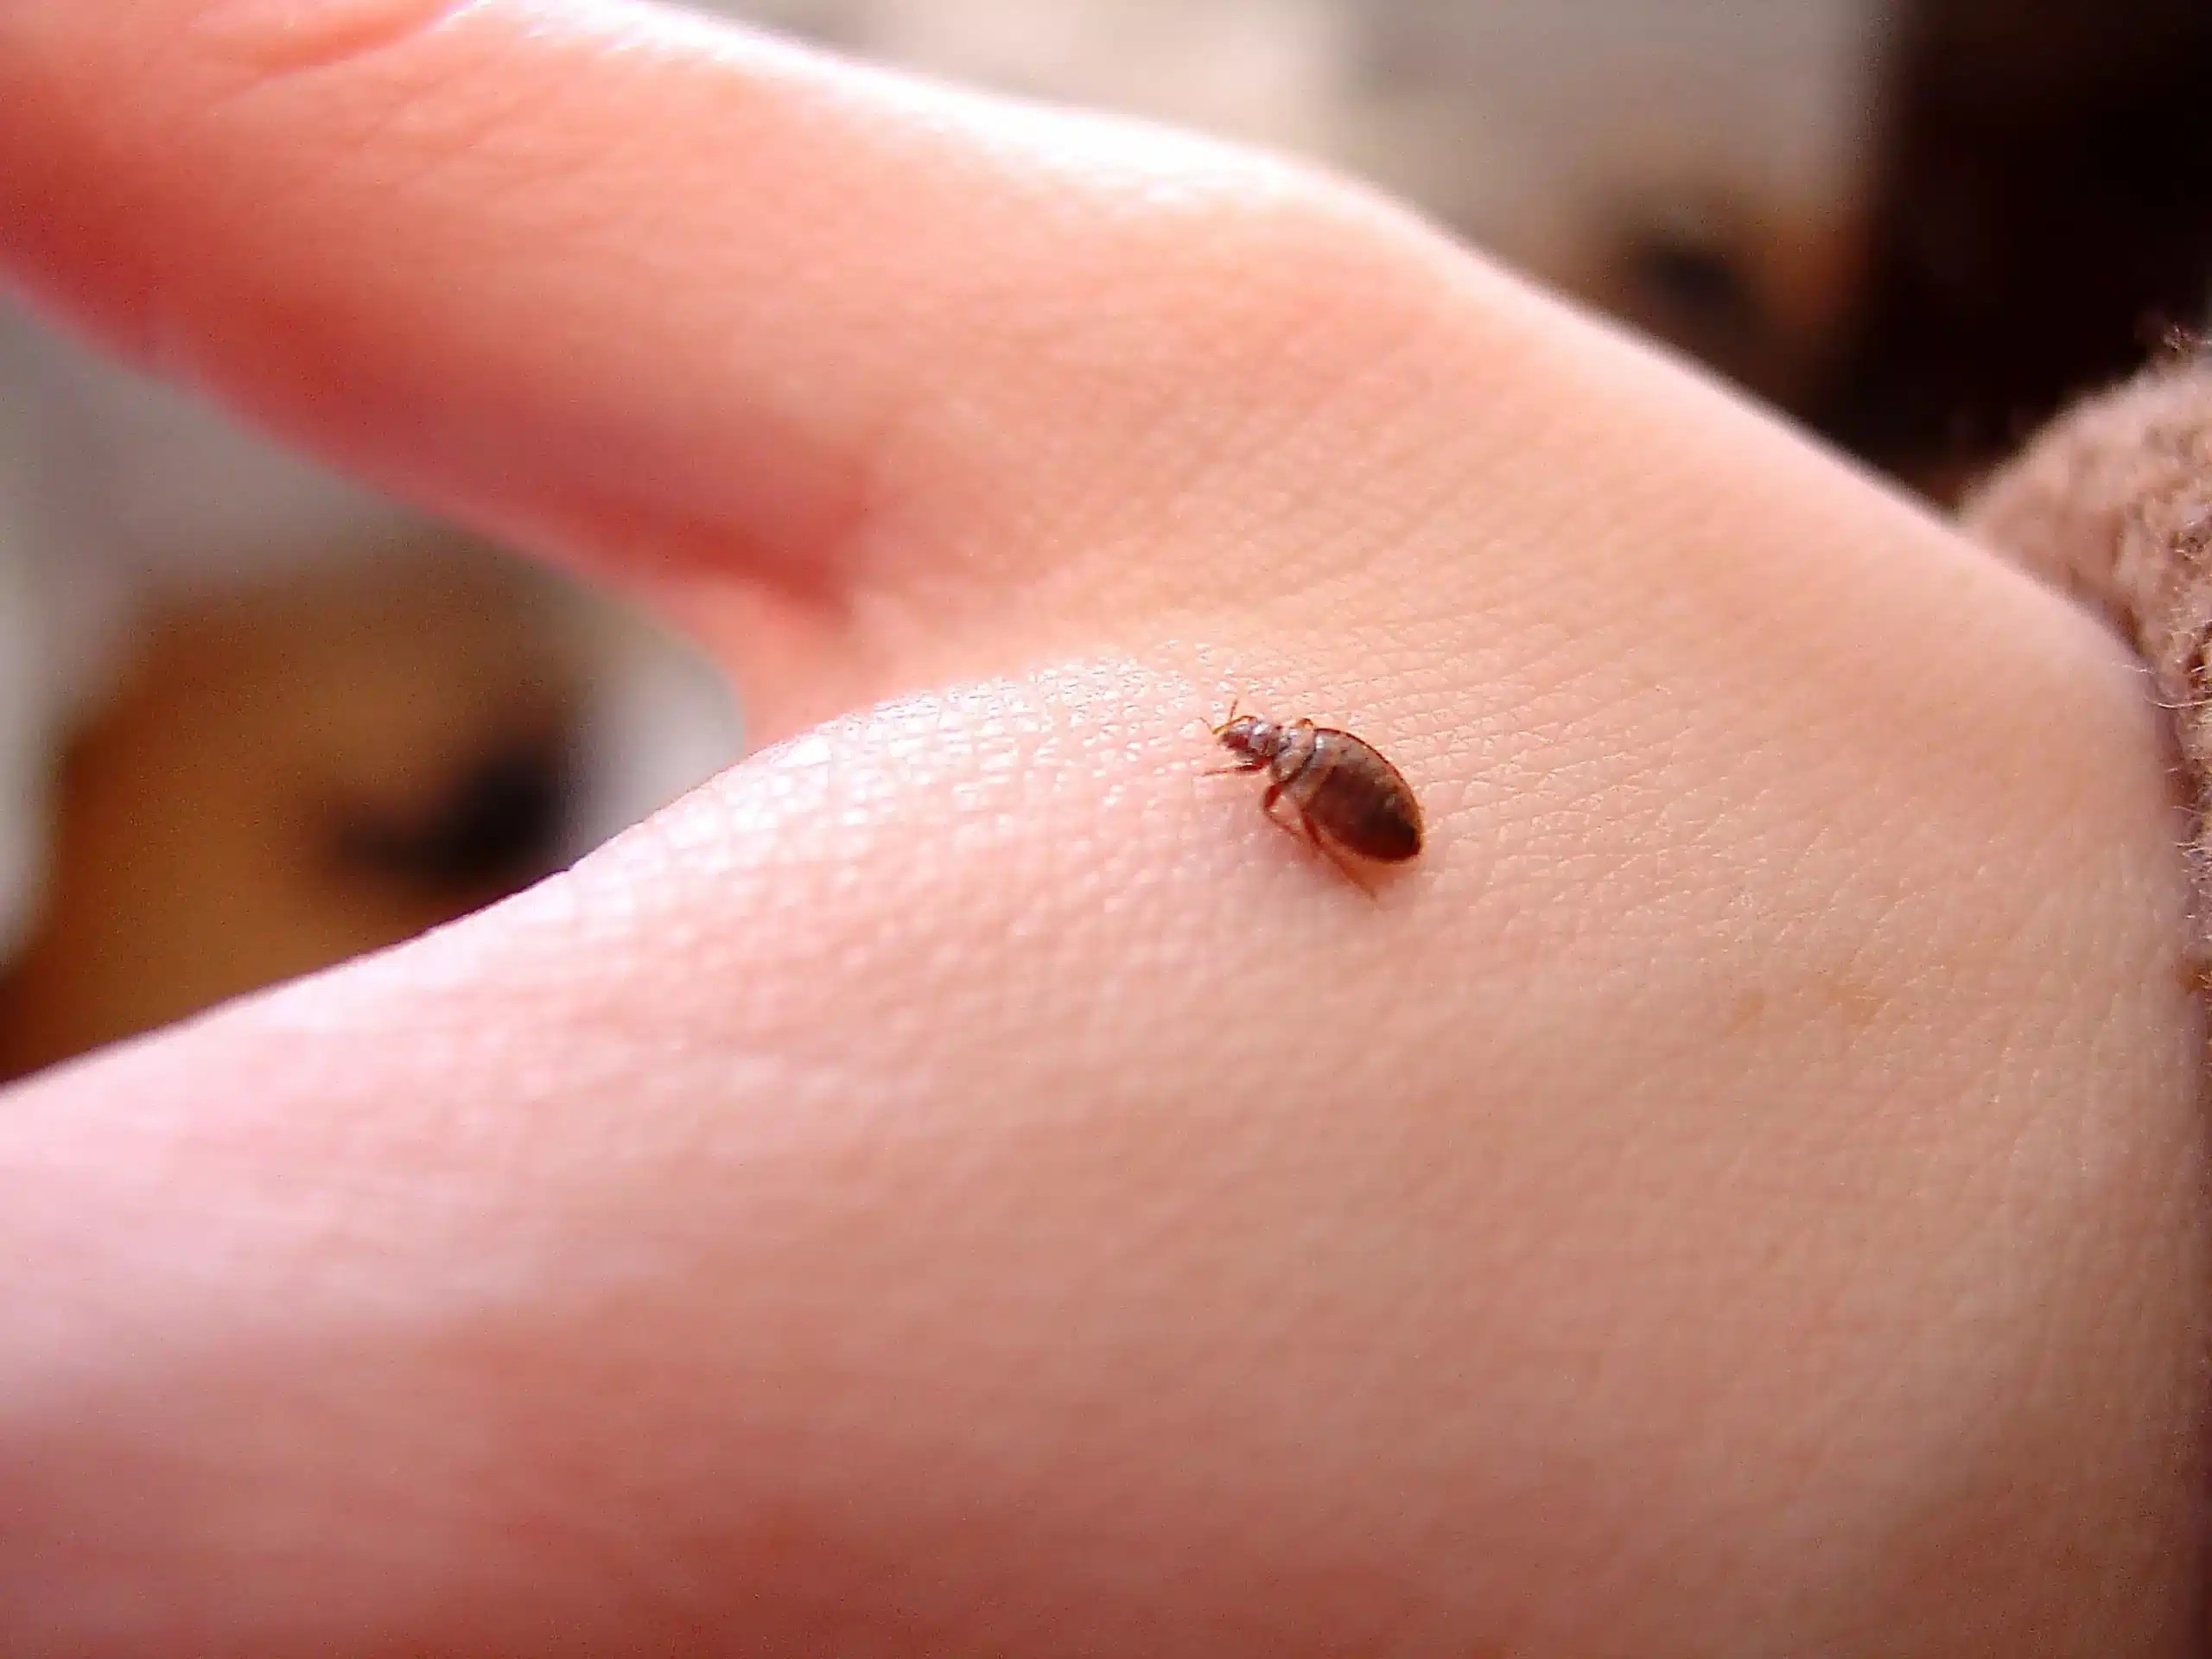 https://www.exterminationdenuisibles.be/wp-content/uploads/2022/10/bed-bug-on-hand_2592x1944-min-scaled.webp